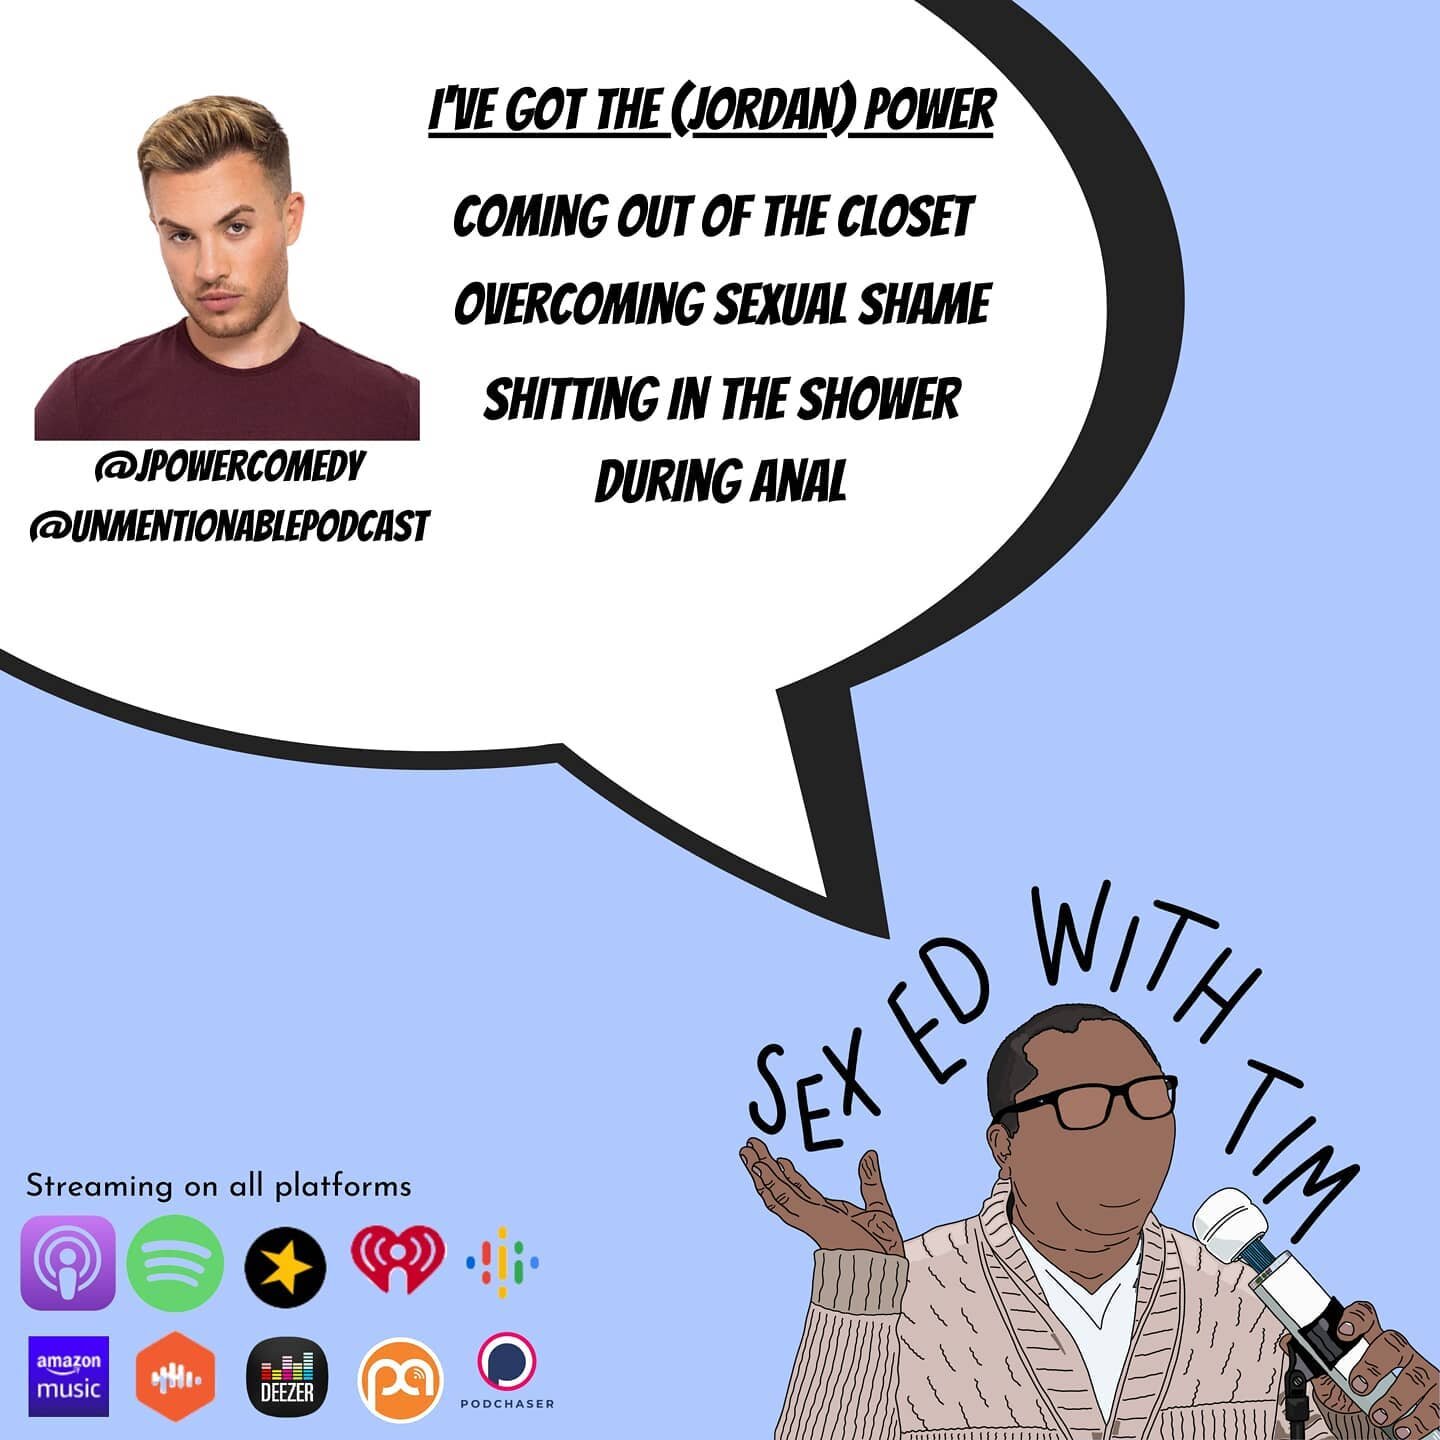 🤡 NEW EPISODE 🤡
🍆
Comedian, author, podcast host, and professional f*ggot. Just some of the many hats that @jpowercomedy wears. Jordan comes on to talk about his coming out, the ramifications of sexual shame, and basically coming to terms with thi